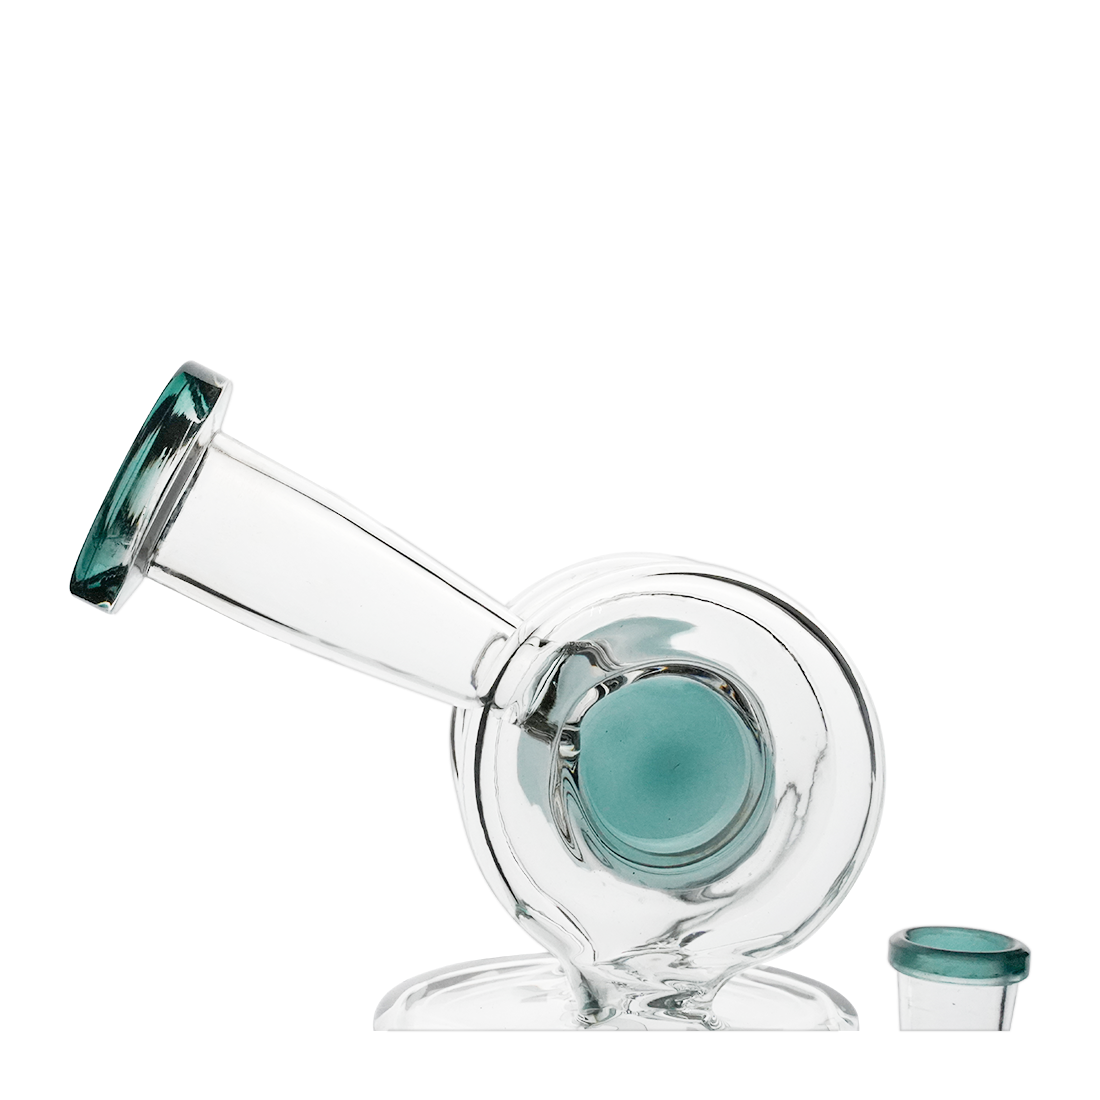 Sidecar Mouthpiece Dab Rig With Double Donut Perc